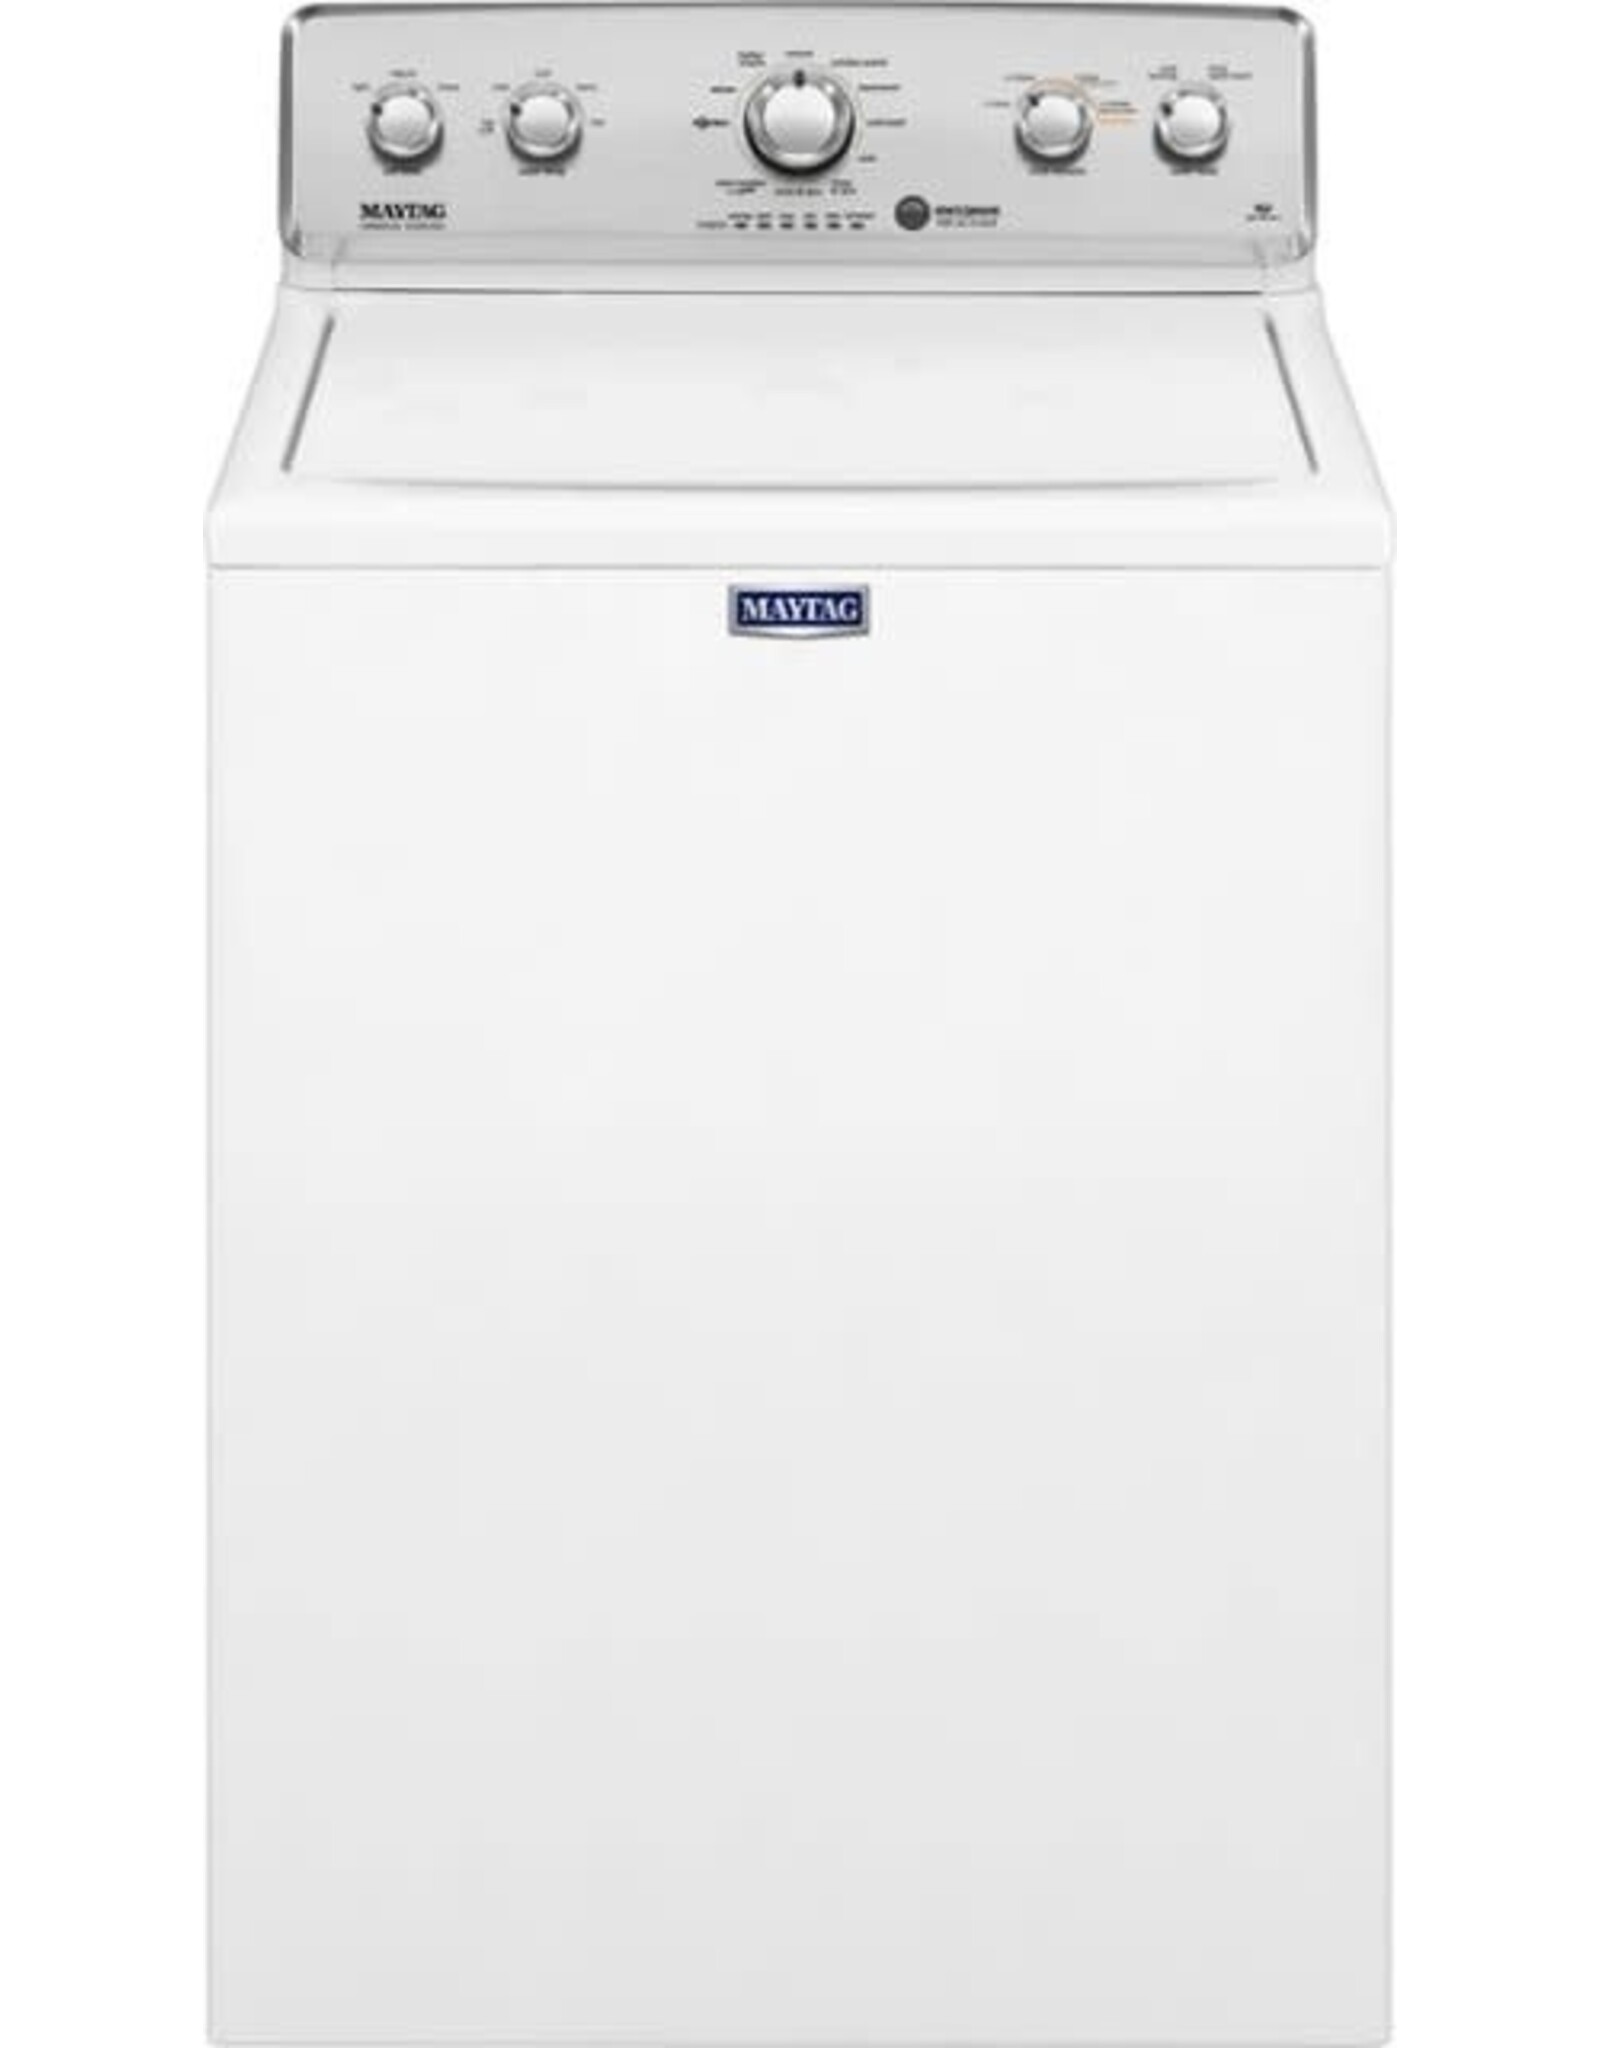 MAYTAG TOP LOAD WASHER WITH THE DEEP WATER WASH OPTION AND POWERWASH® CYCLE – 4.2 CU. FT.